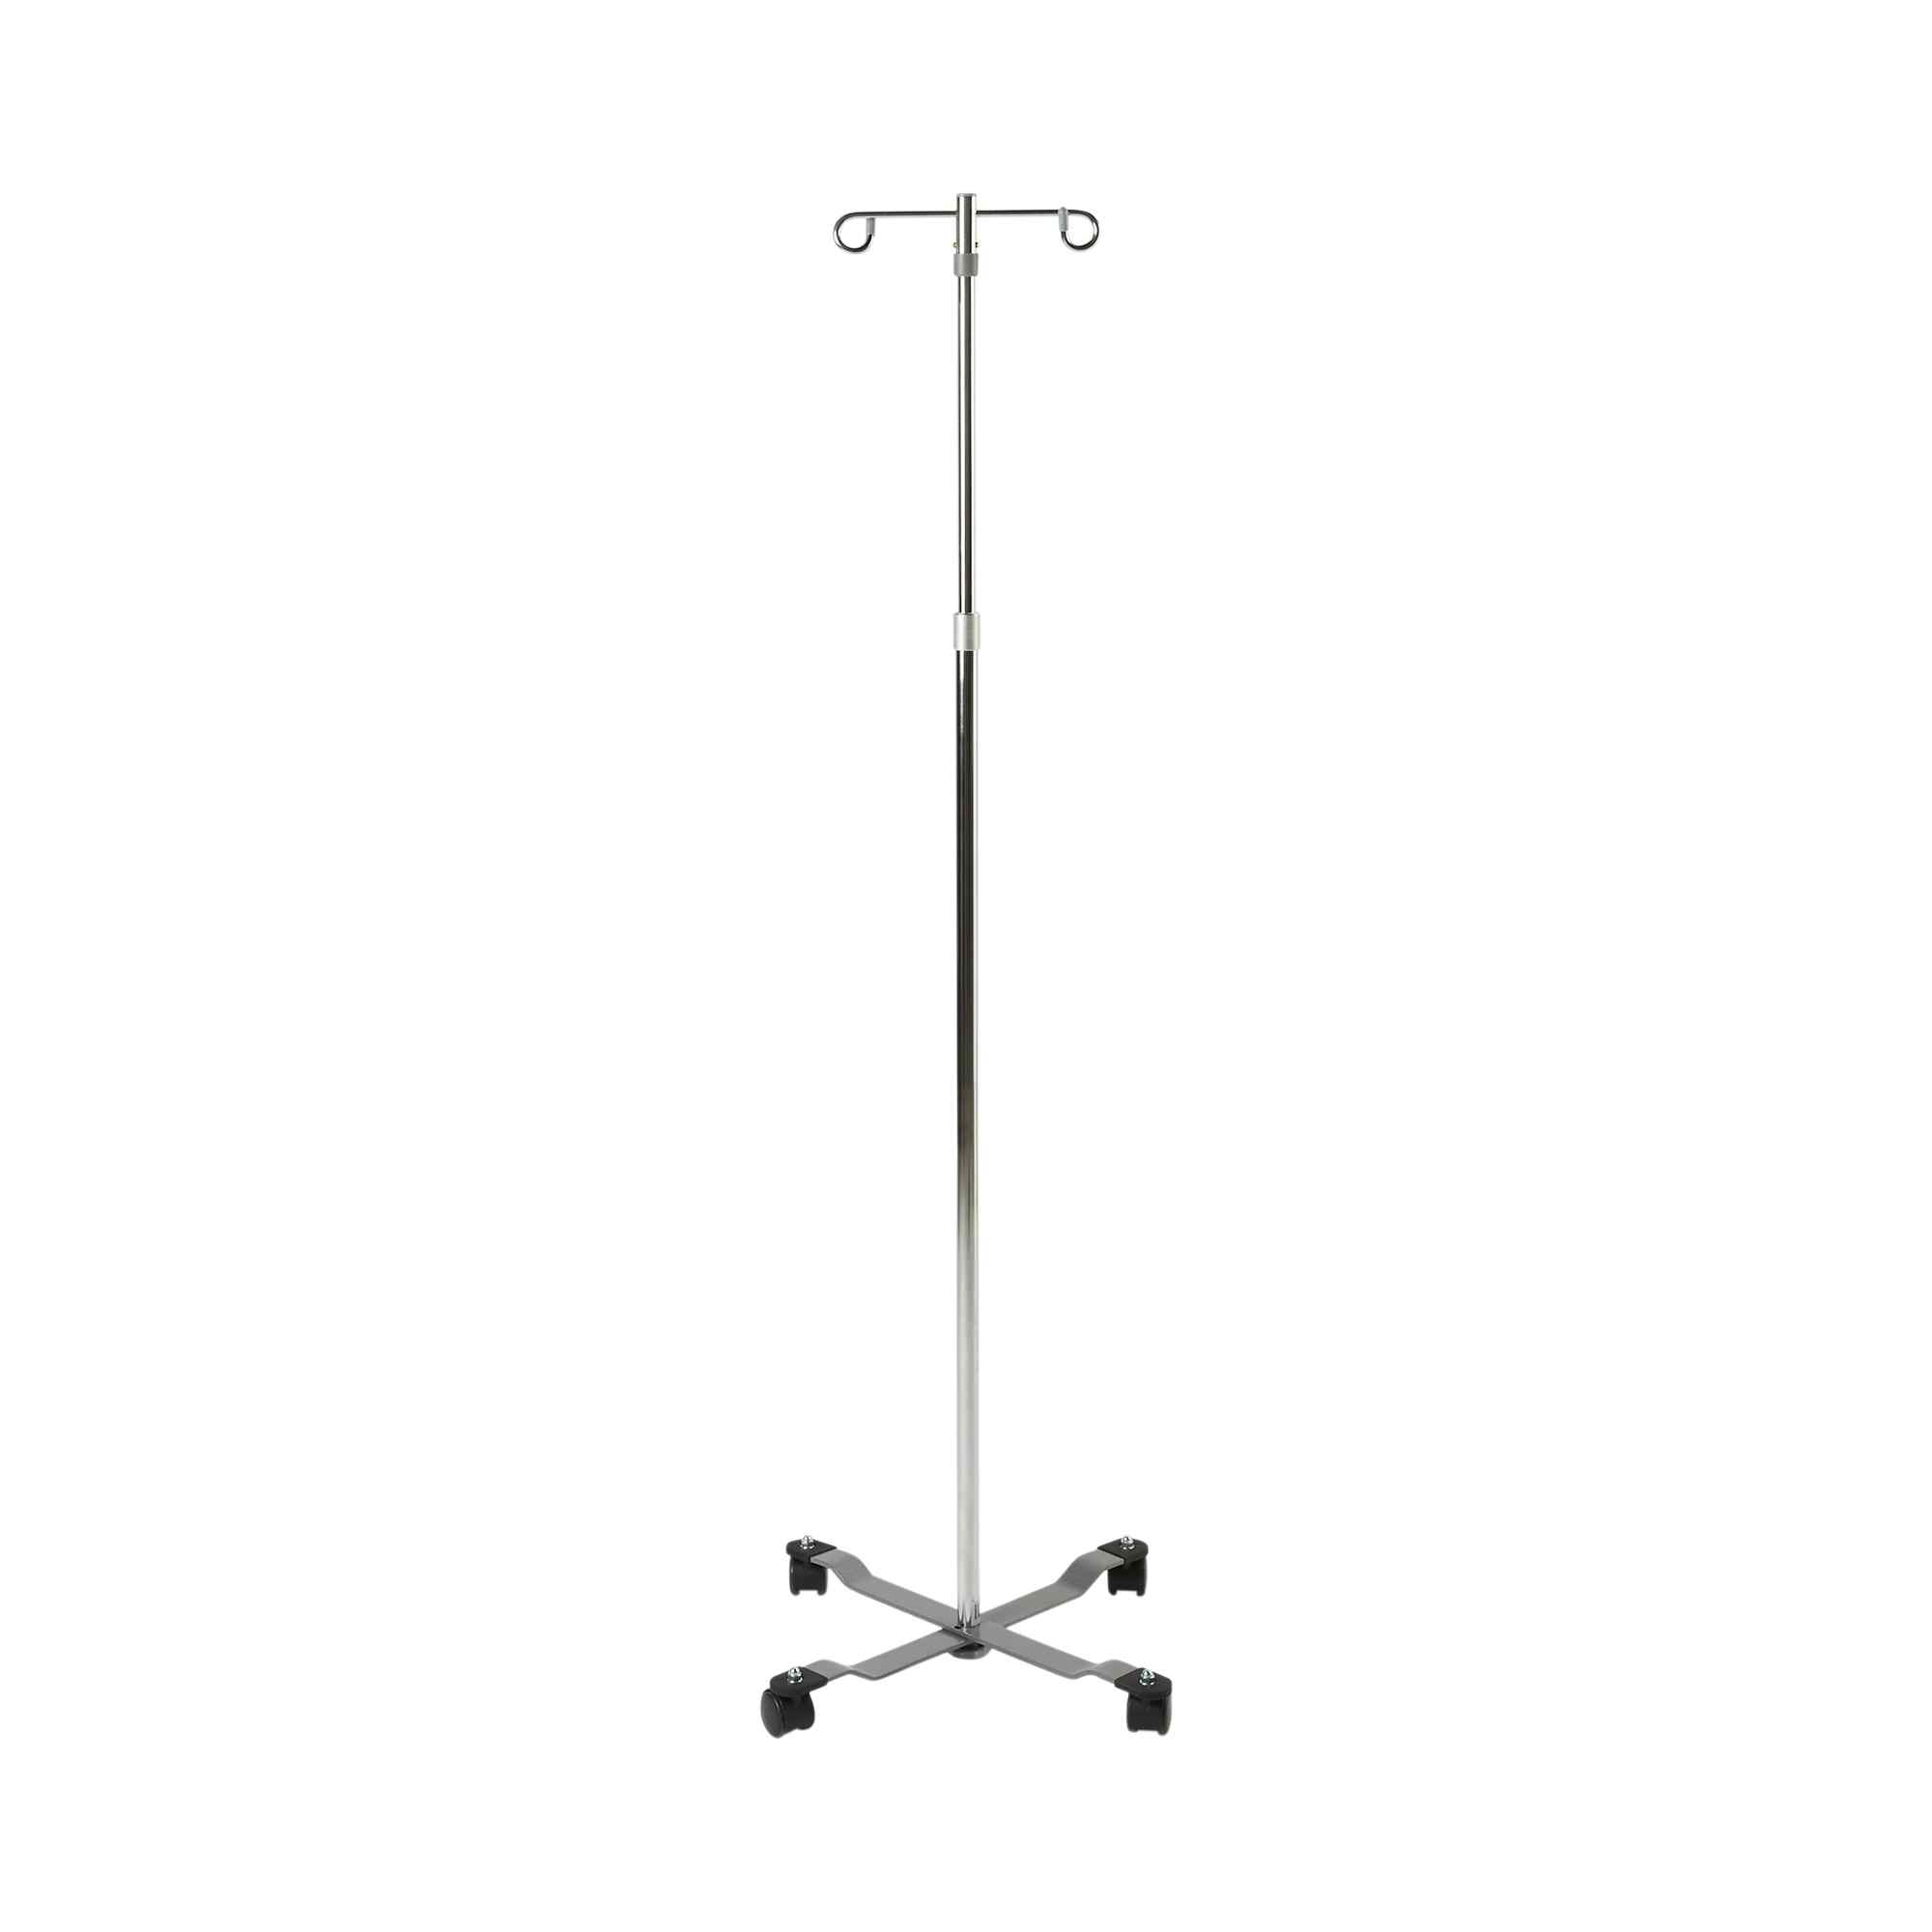 McKesson IV Stand Floor Stand Steel Base, 22 Inch, 81-11300, 1 Stand